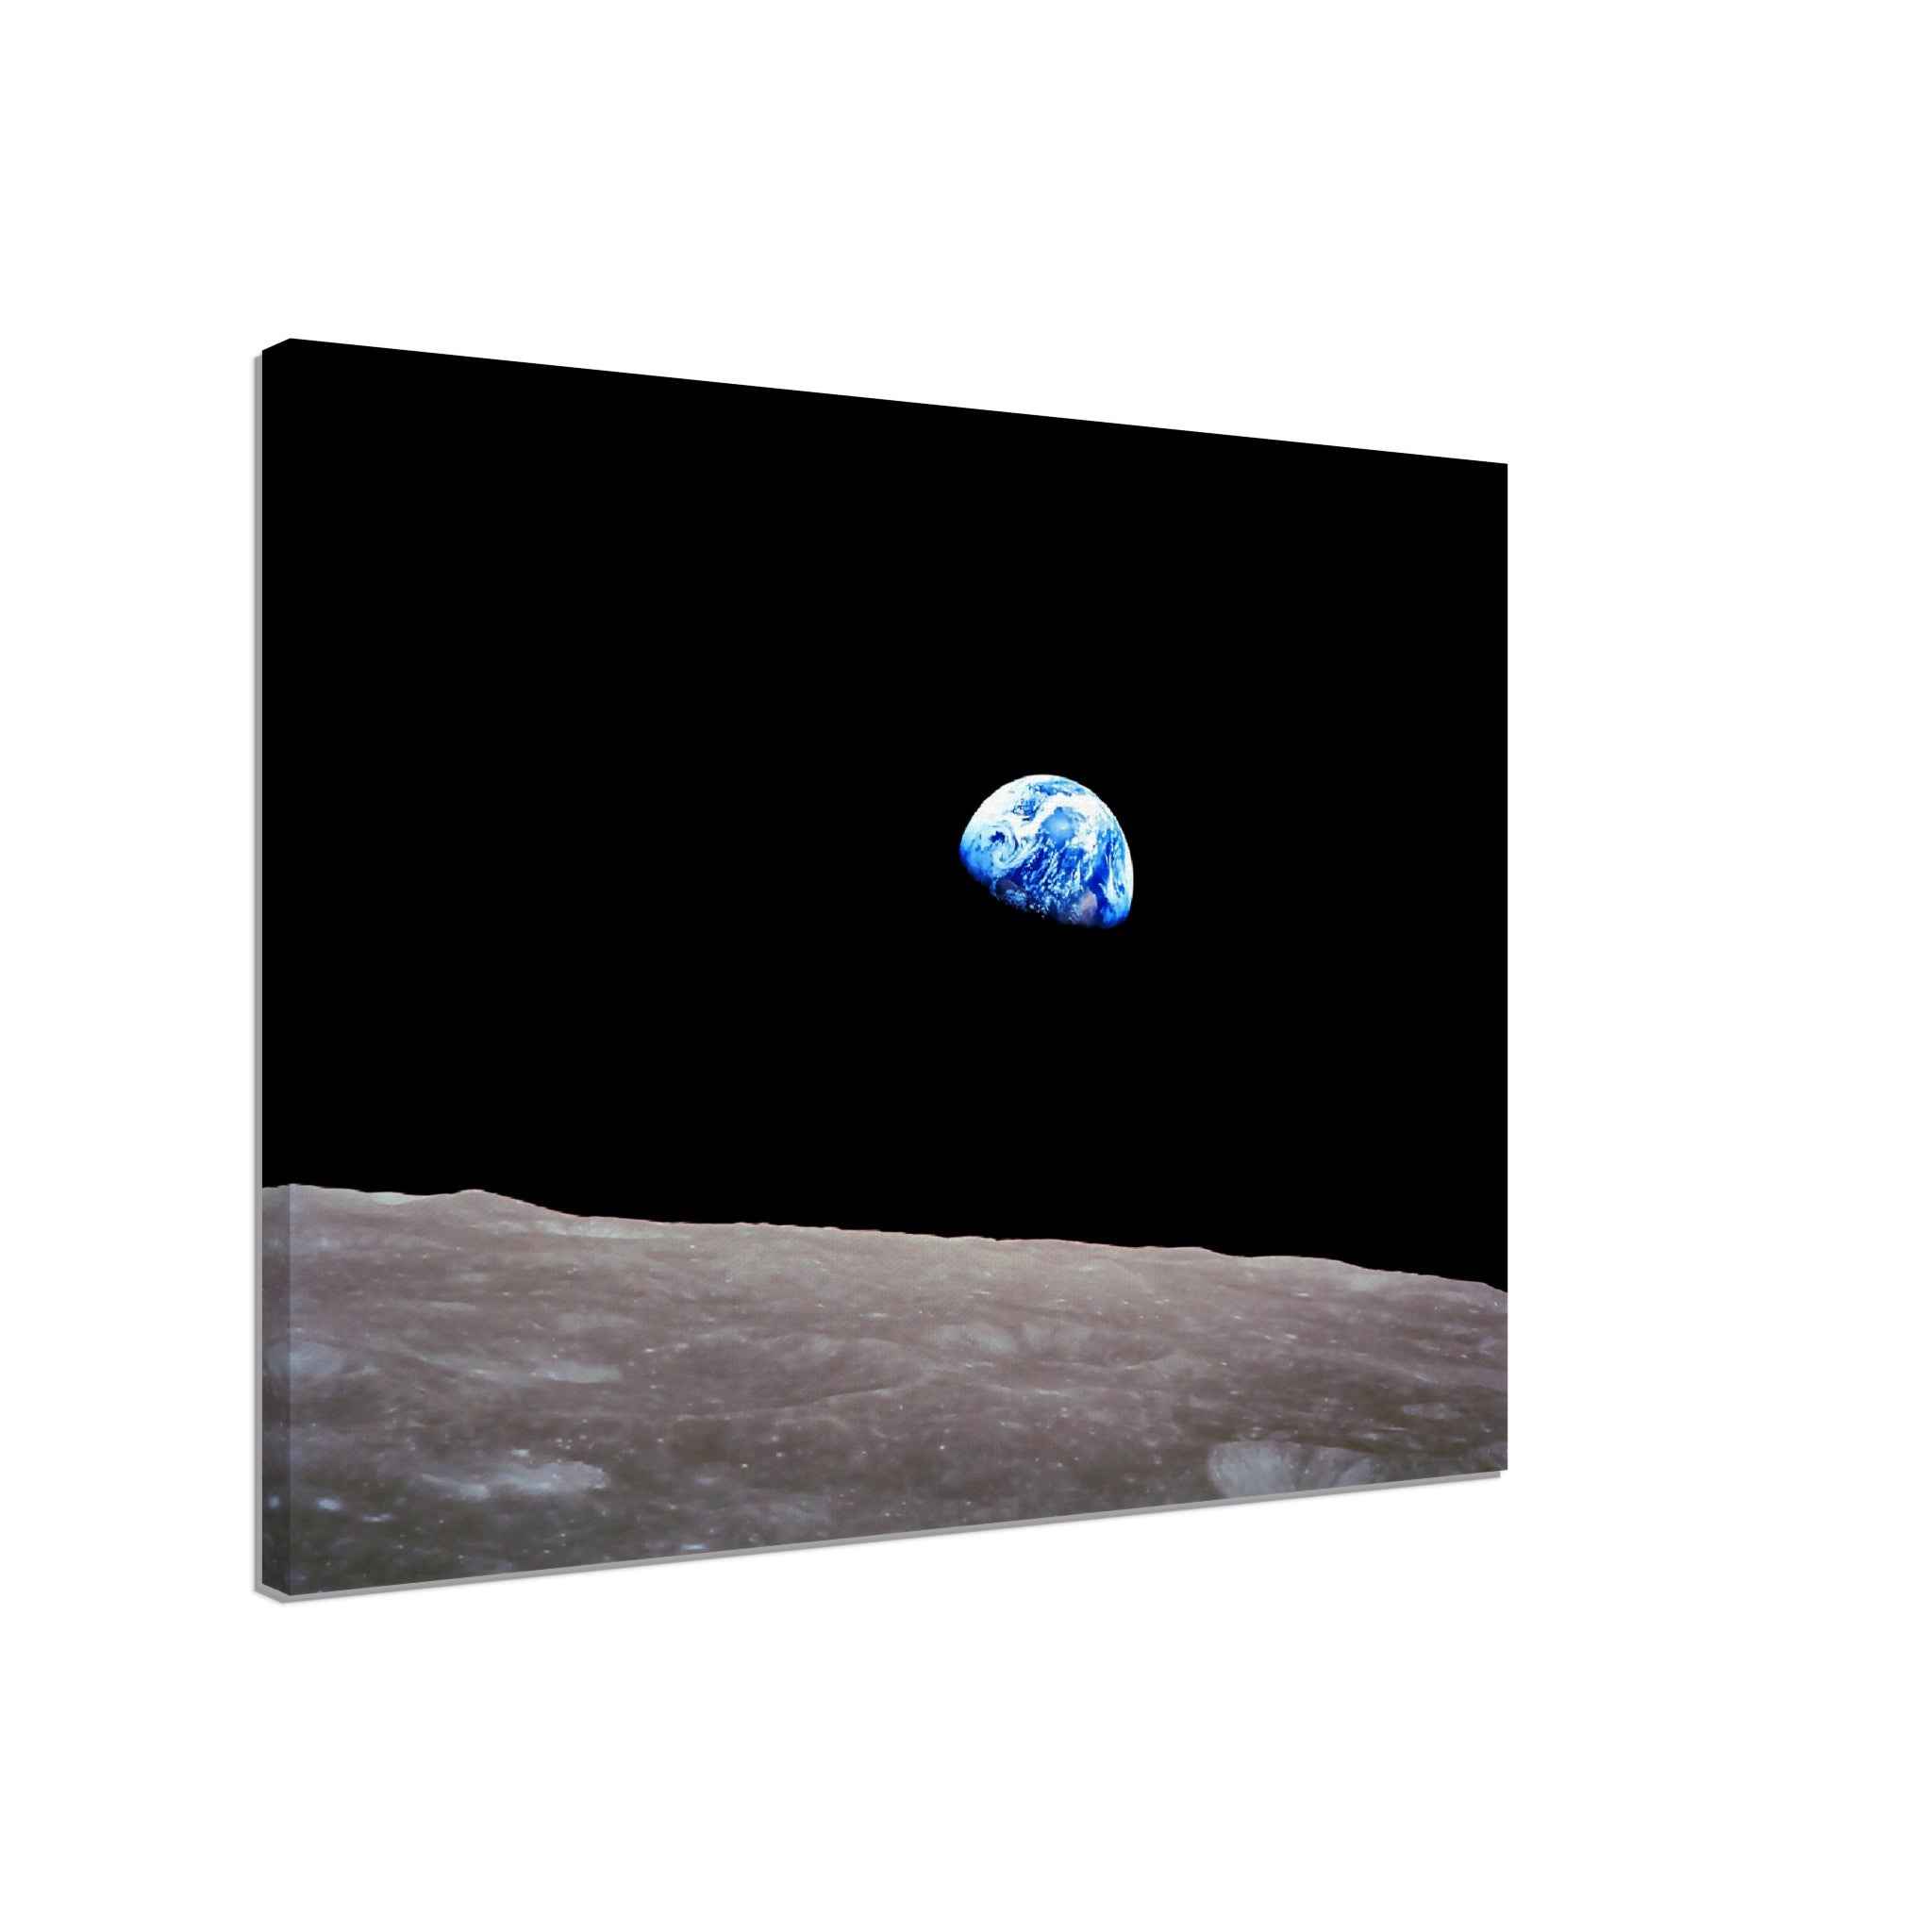 Earthrise Canvas, Famous Photo Canvas Print From 1968, Shot From The Moon, Beginning The Environmental Movement - WallArtPrints4U